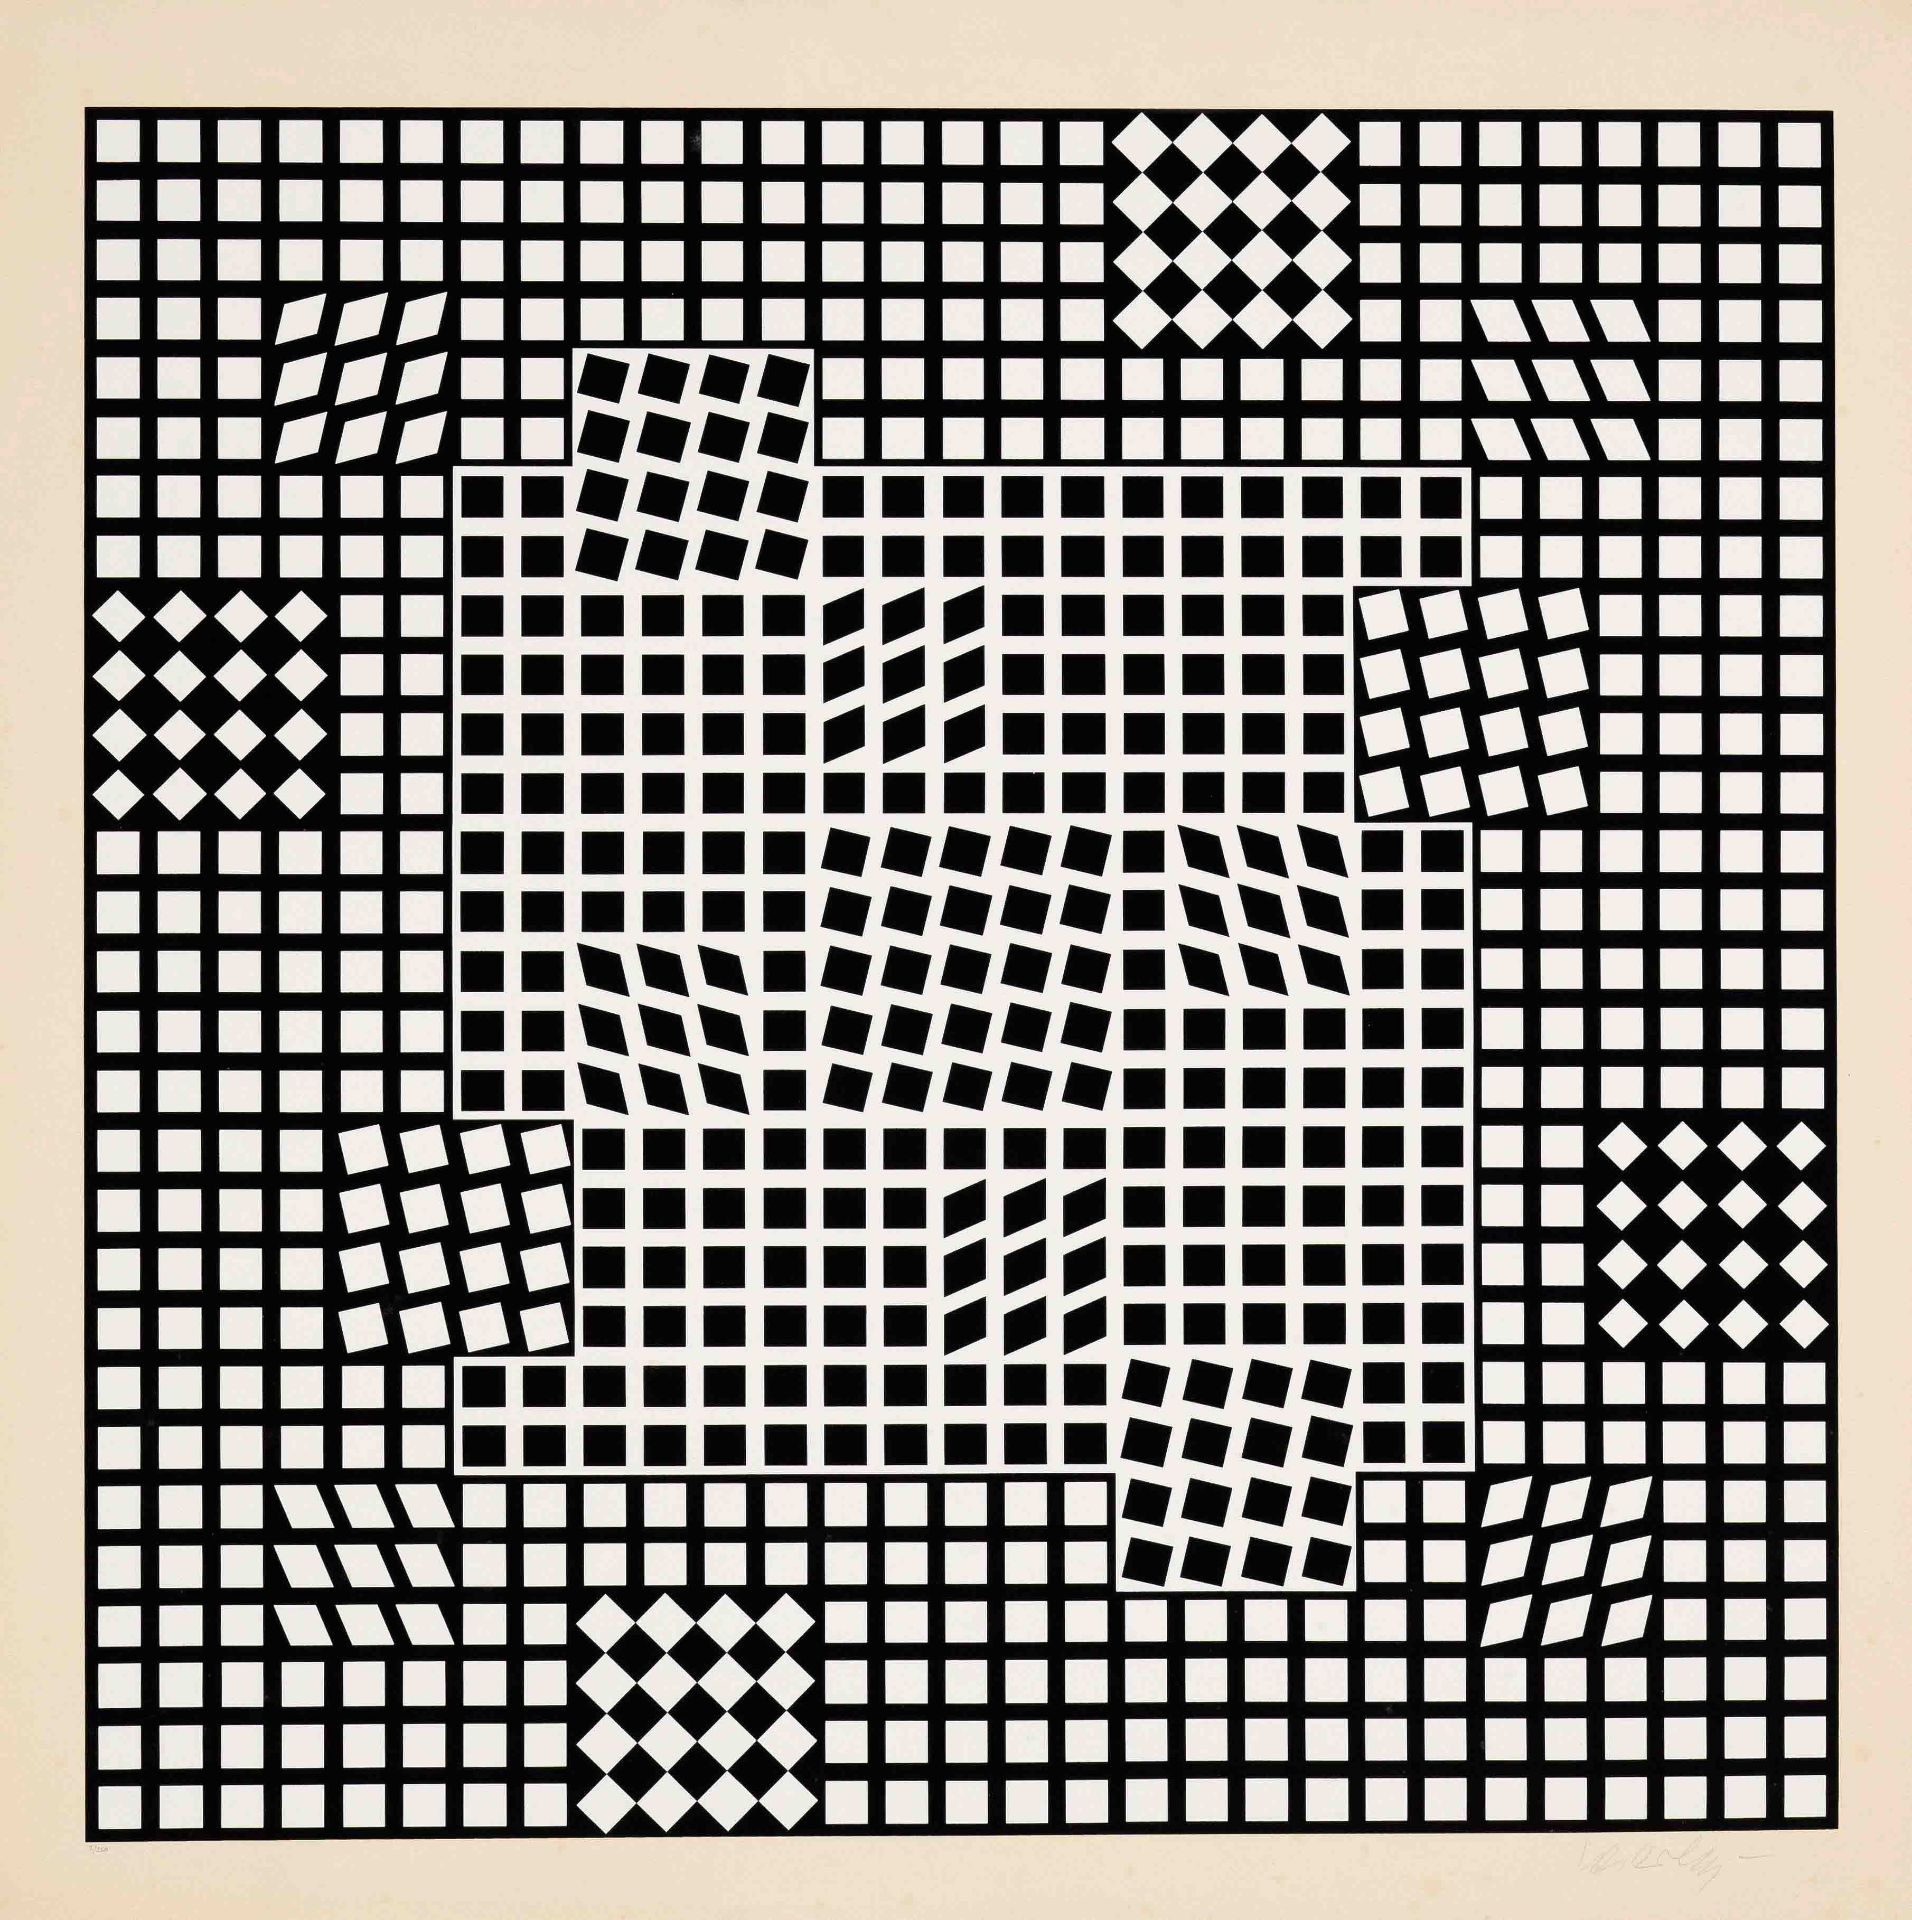 Vasarely, Victor. 1906 Pécz - 1997 Annet-sur-Marne. Untitled [Geometric composition in black and